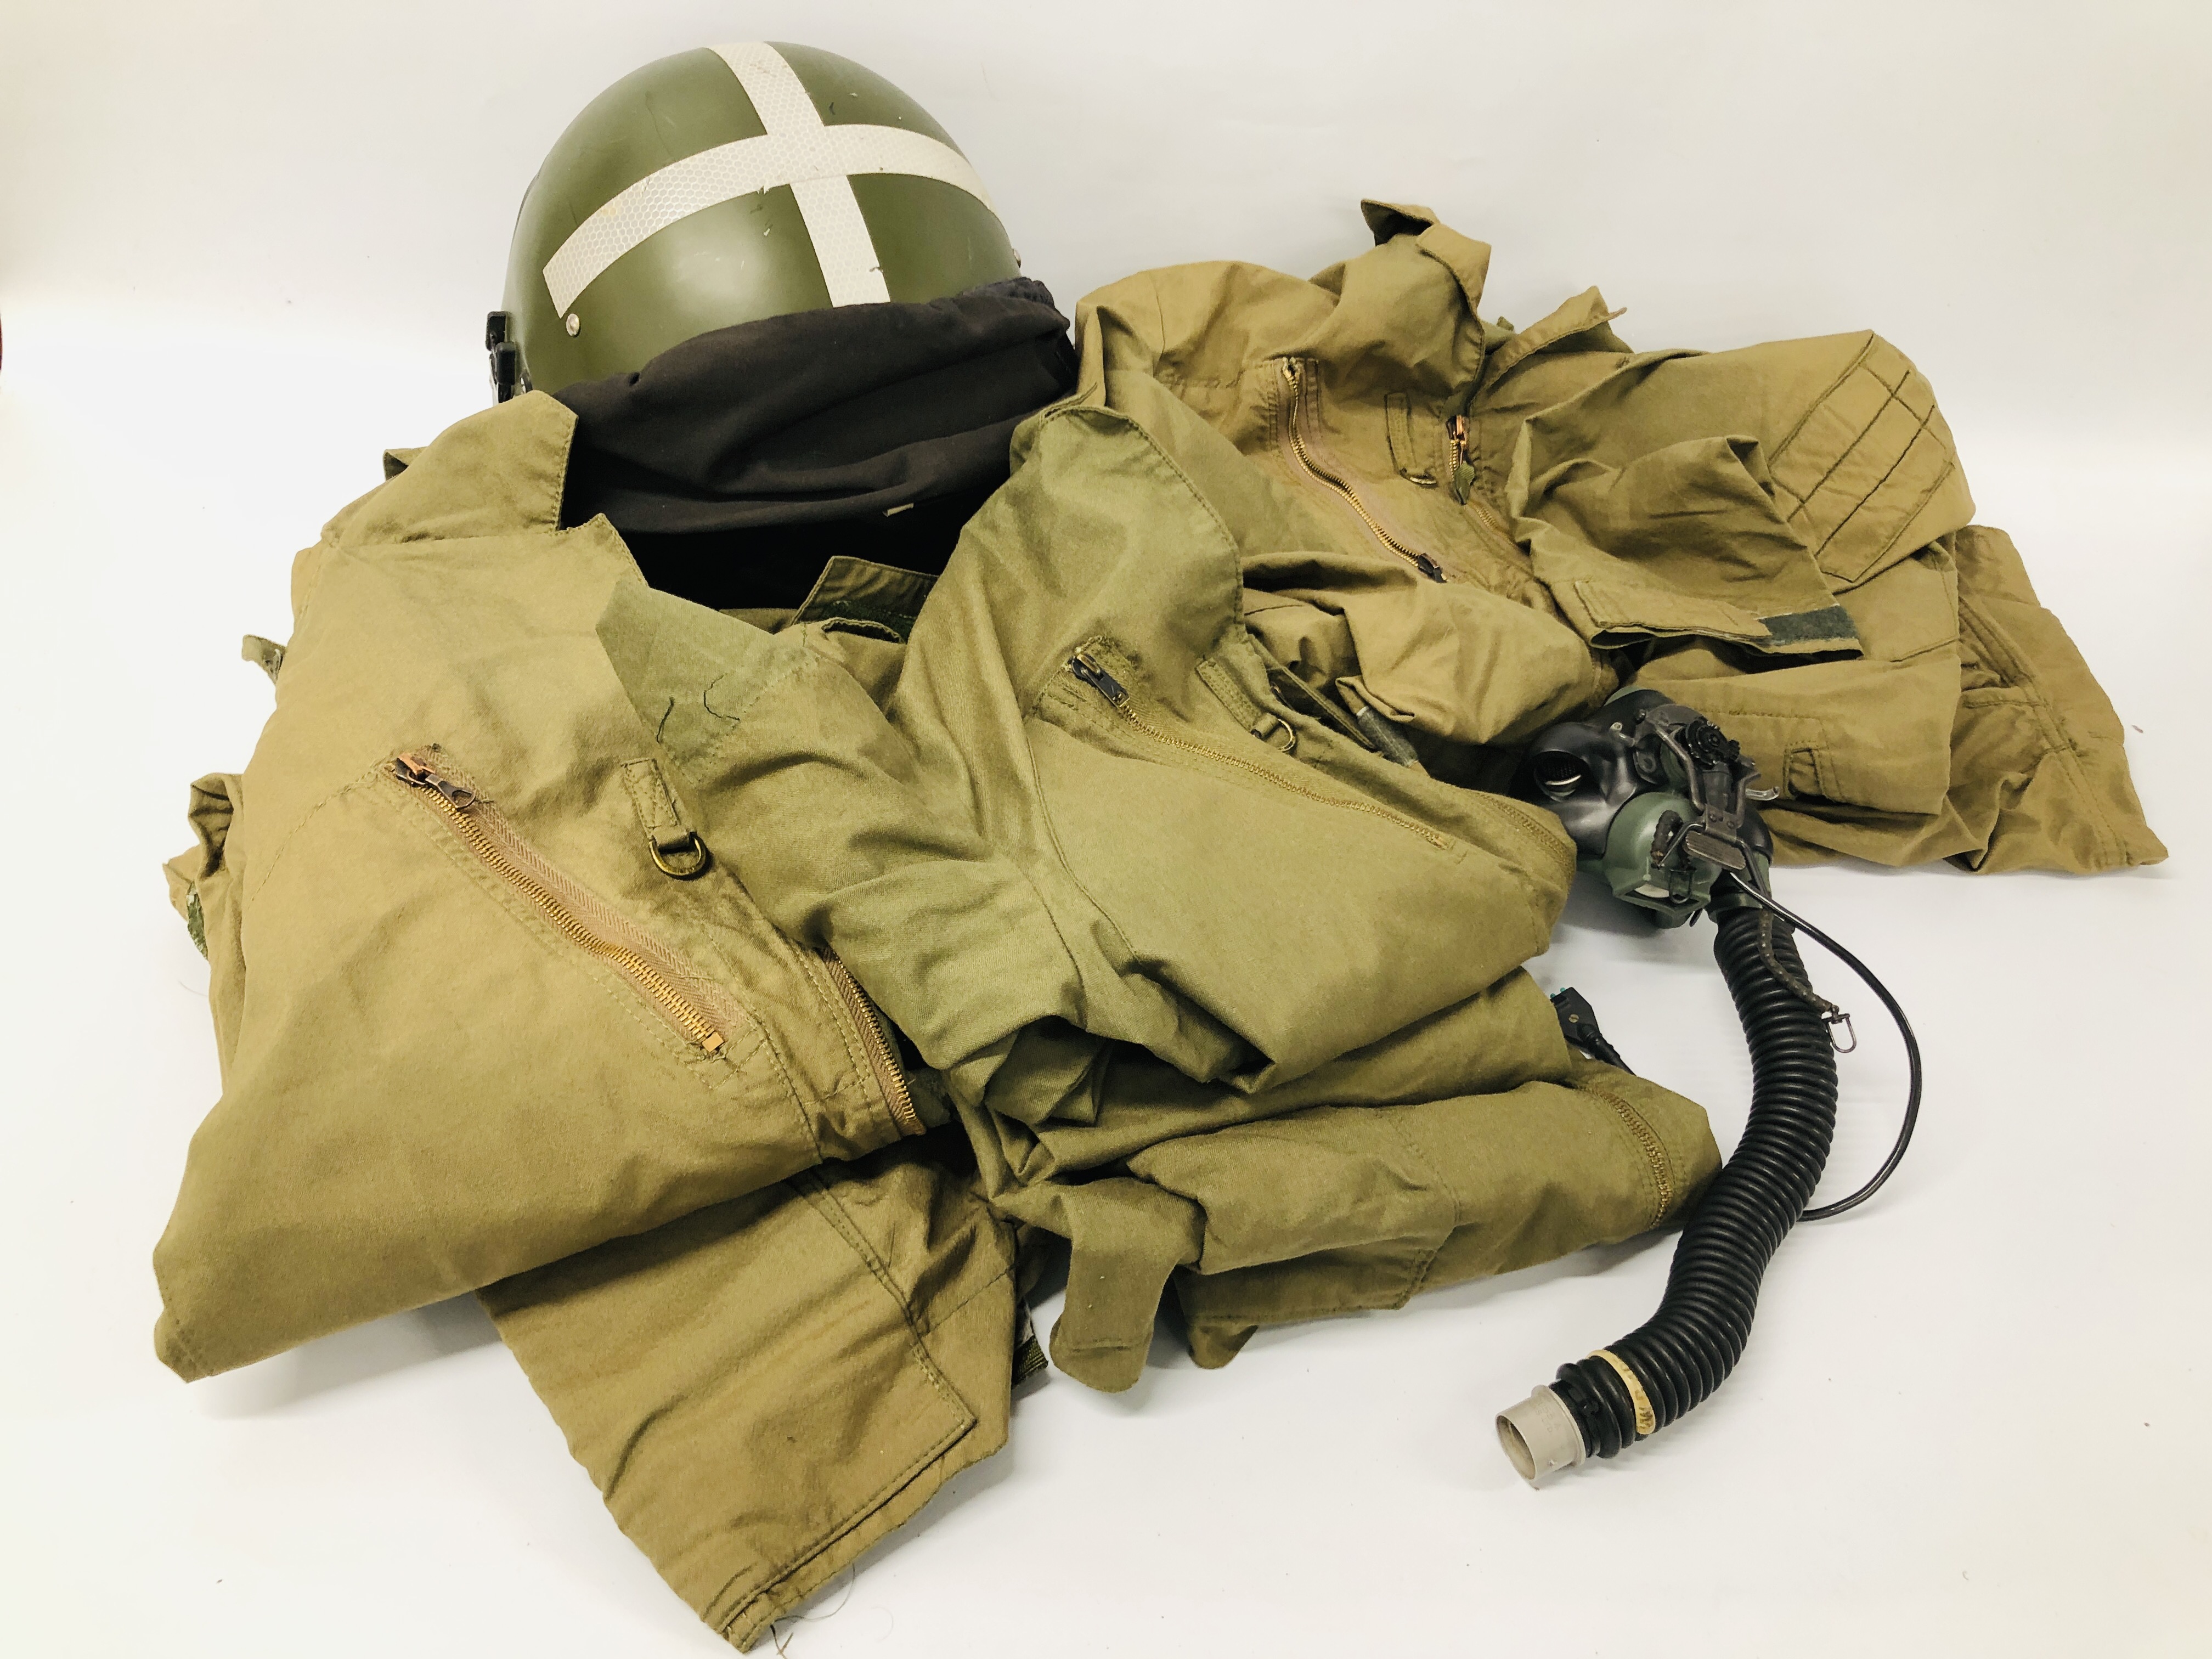 A FIGHTER PILOT'S HELMET ALONG WITH OXYGEN REGULATOR AND THREE SETS OF FLYING COVERALLS (FOR